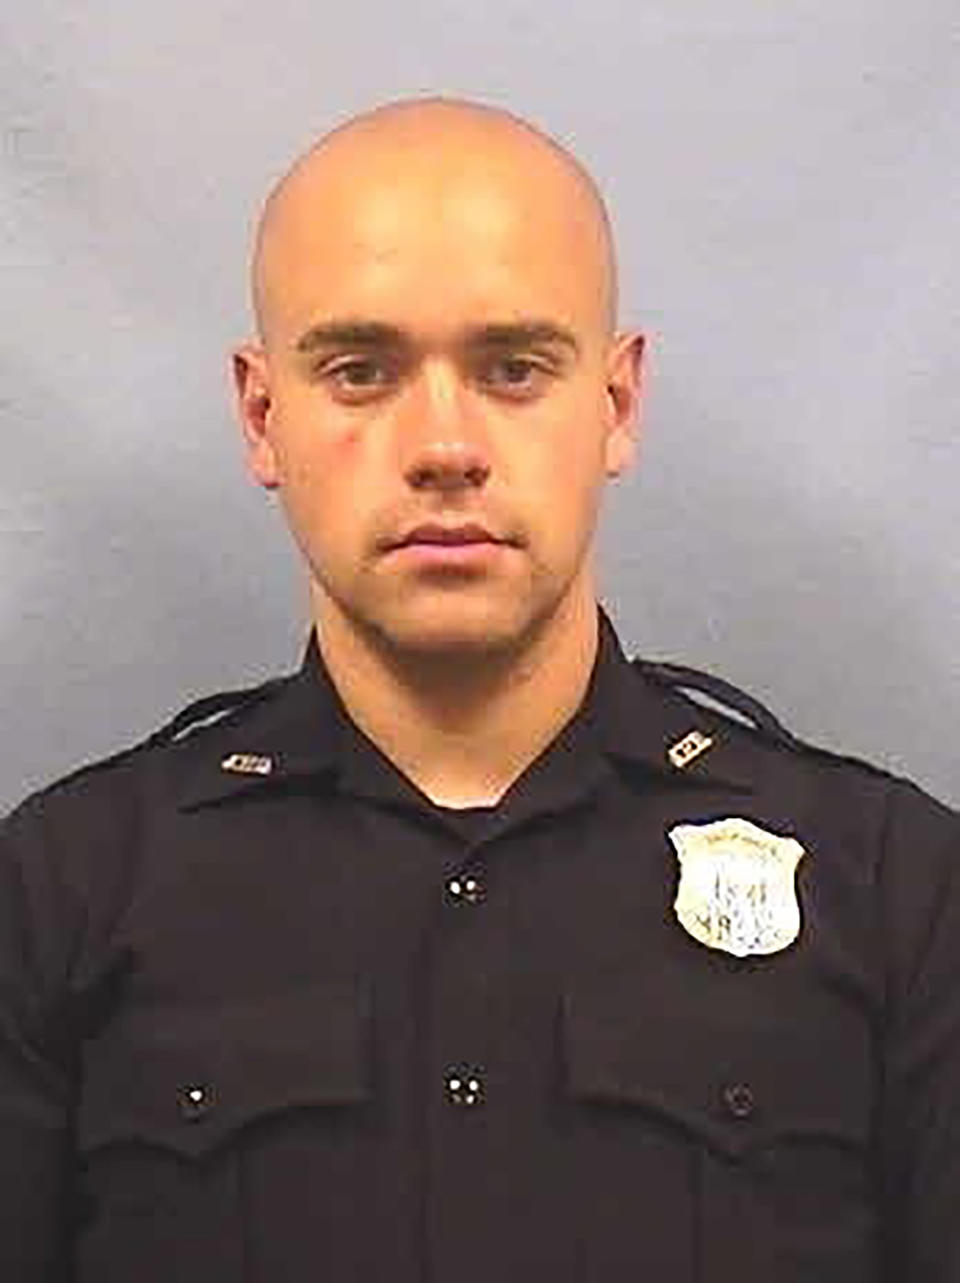 This undated photo provided by the Atlanta Police Department shows Officer Garrett Rolfe. Rolfe was fired following the fatal shooting of a black man and another officer was placed on administrative duty, the police department announced early Sunday, June 14, 2020. (Atlanta Police Department via AP)